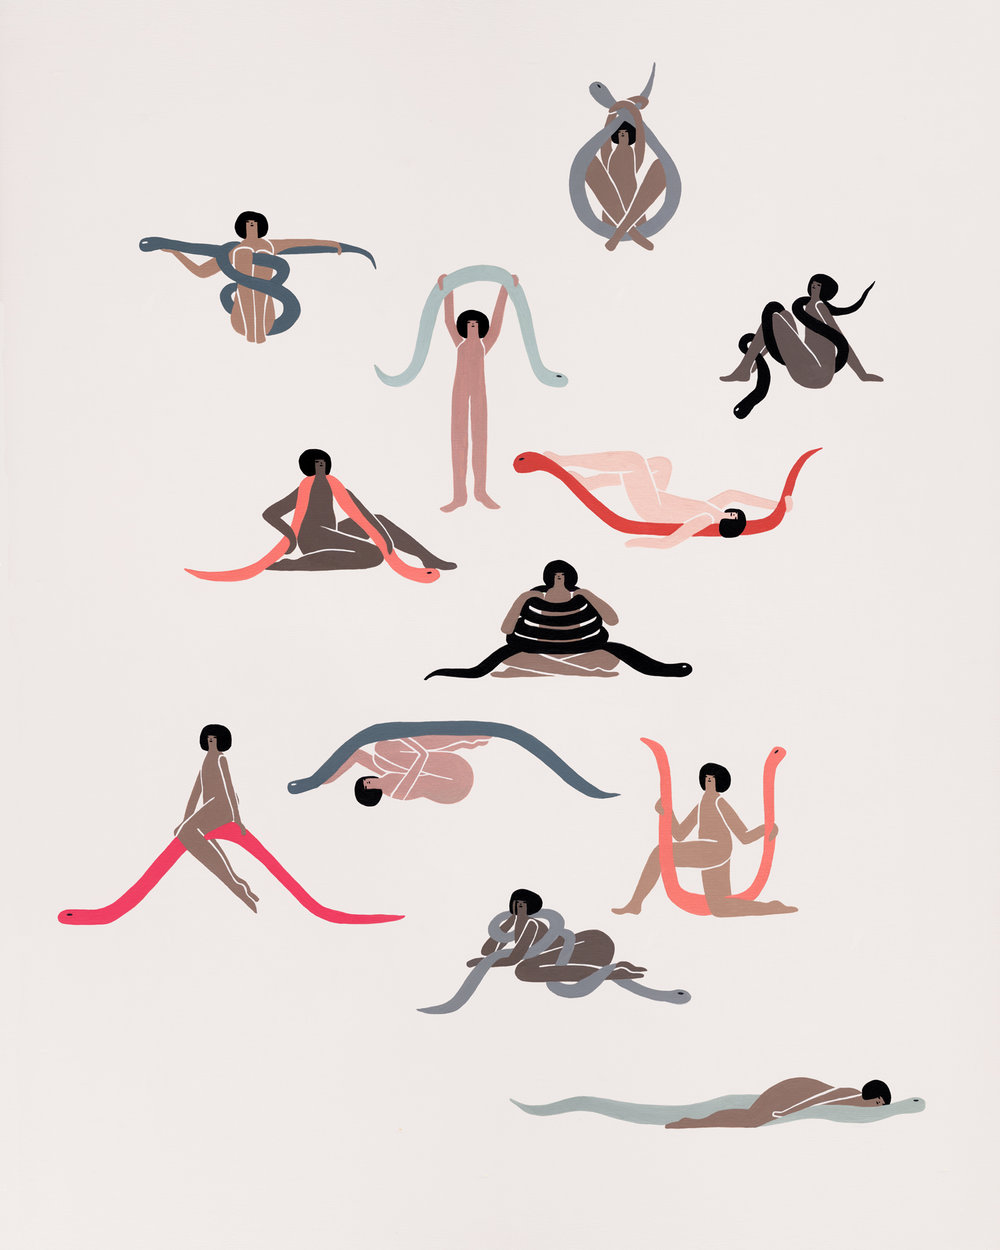 Laura Berger - With Snakes